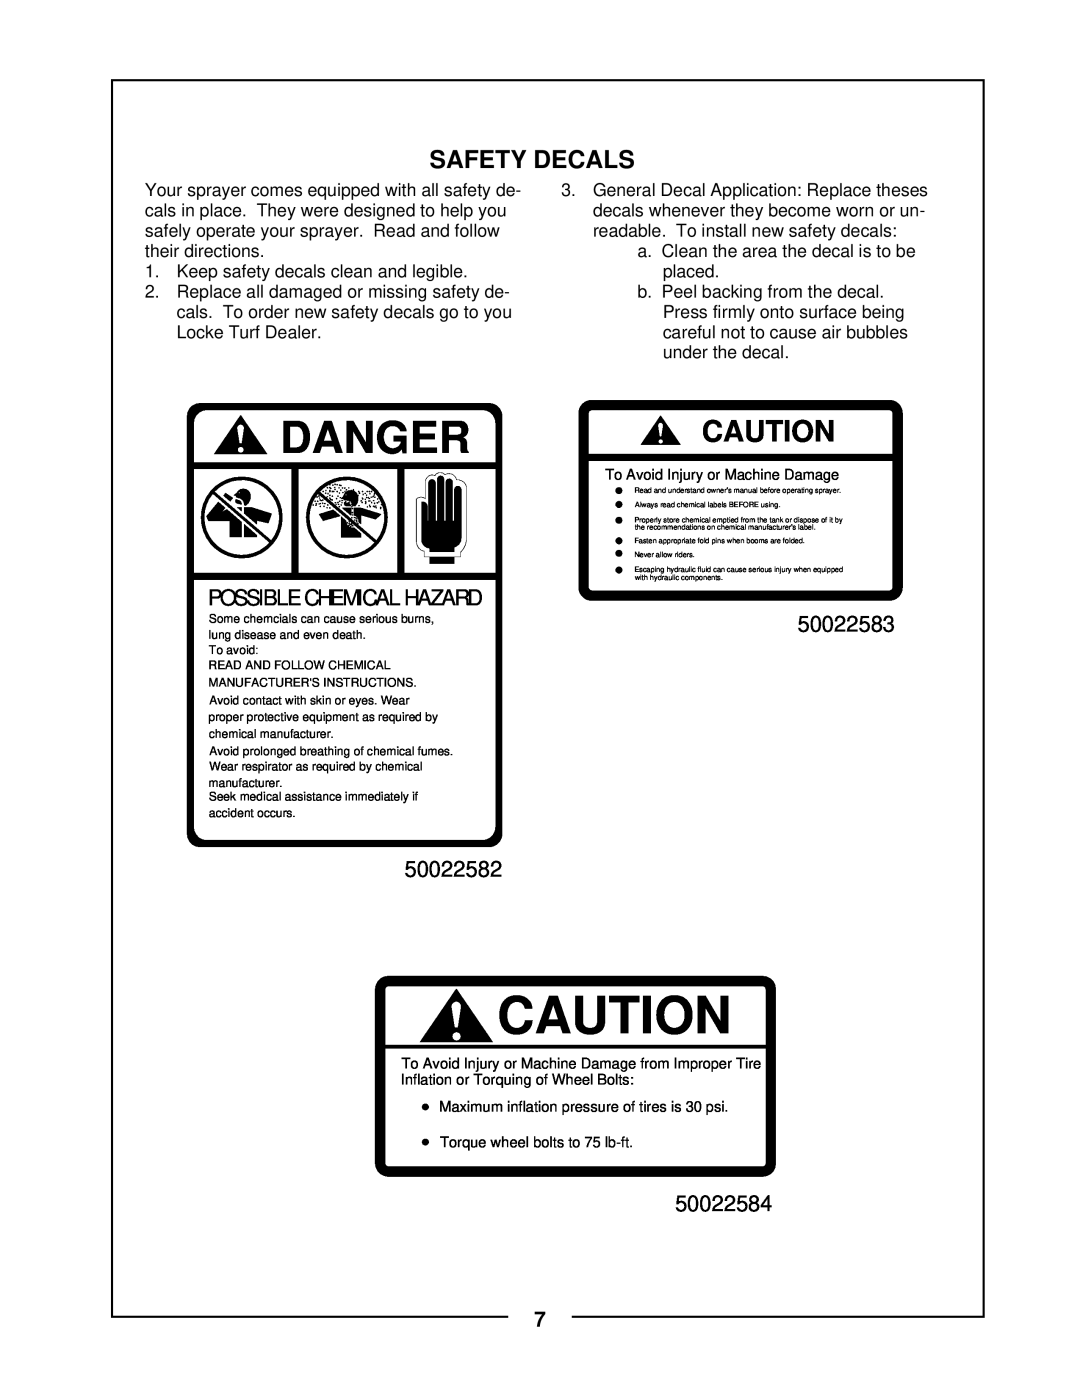 Locke TR-30 manual Safety Decals, Danger, Possible Chemical Hazard, 50022582, 50022583, 50022584 